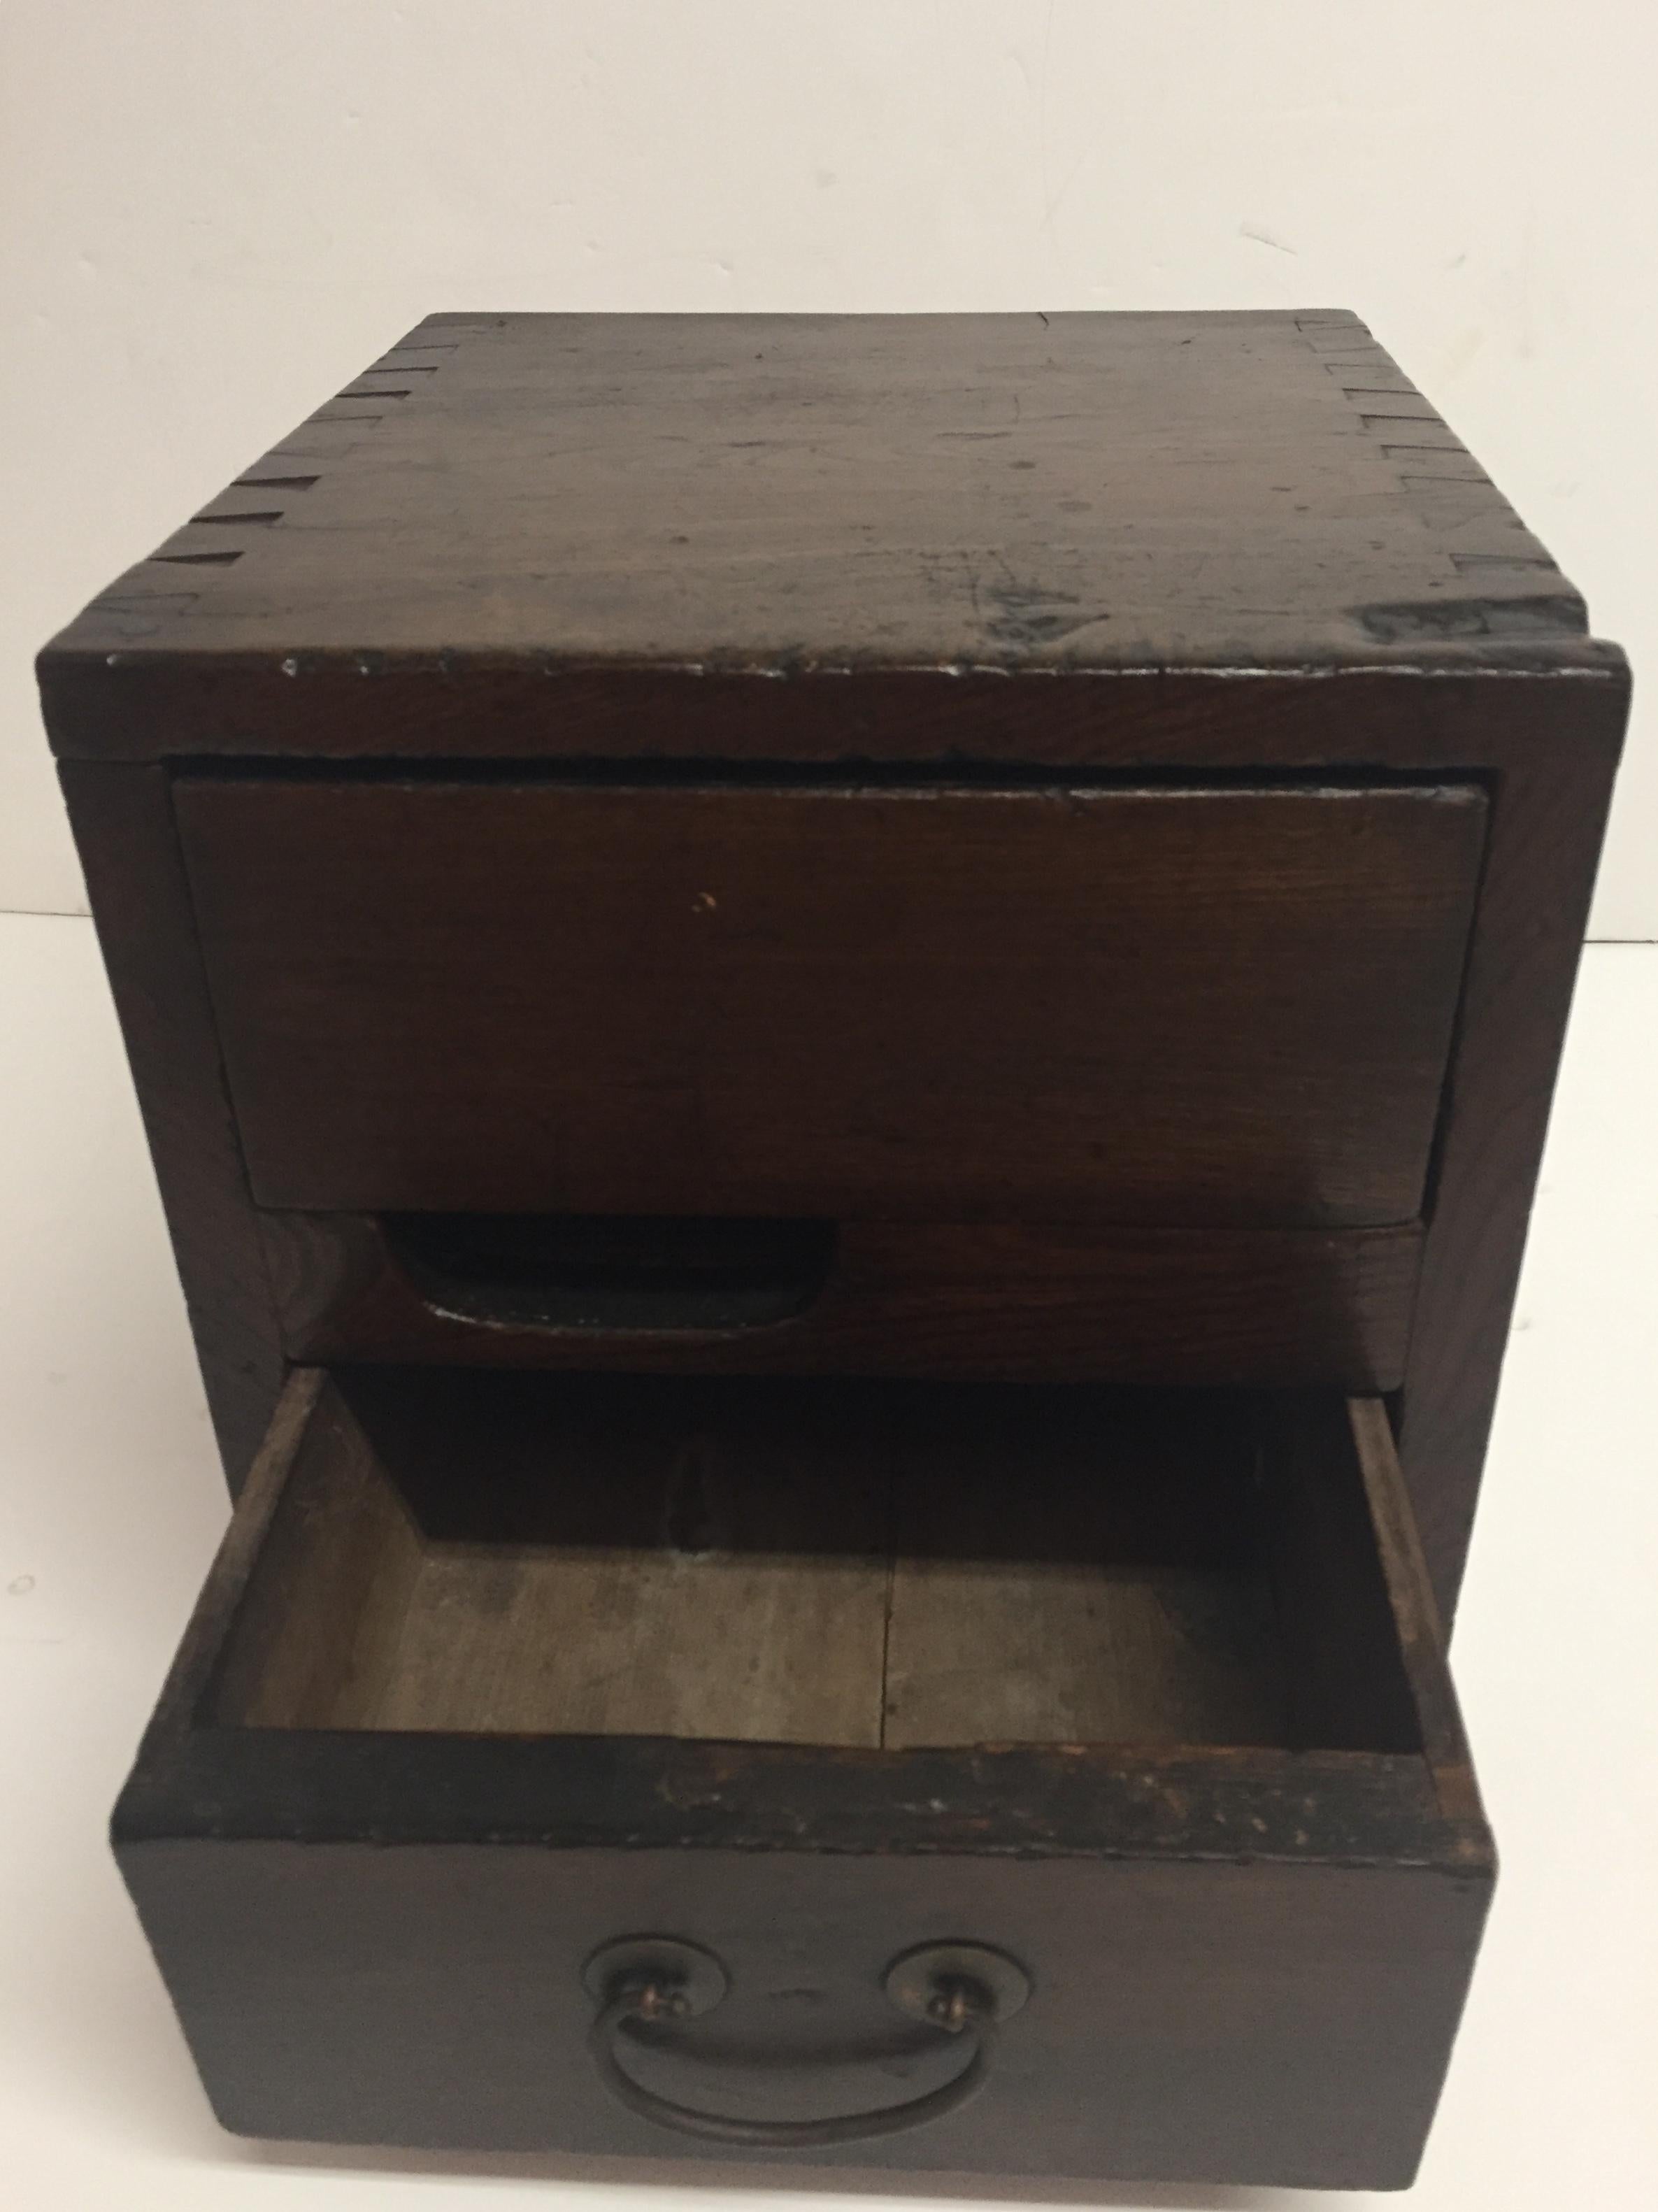 Beautifully made antique Chinese money box having drawer and dovetailed construction, circa 1910.
From the collection of Tim Hunt and Tama Janowitz.